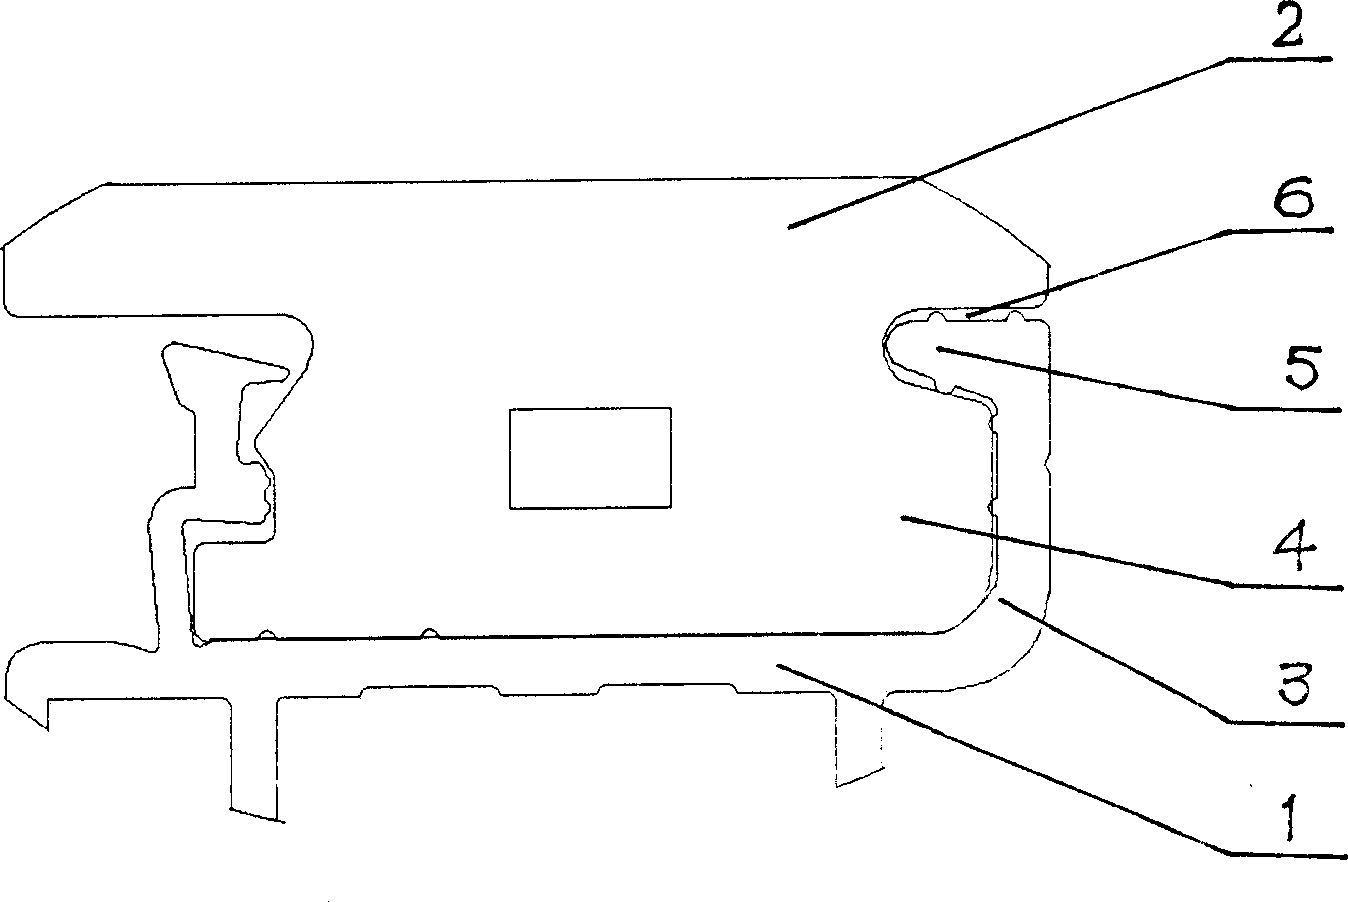 Pulling on press type composite shape bar of aluminum and wood, and fabricating method